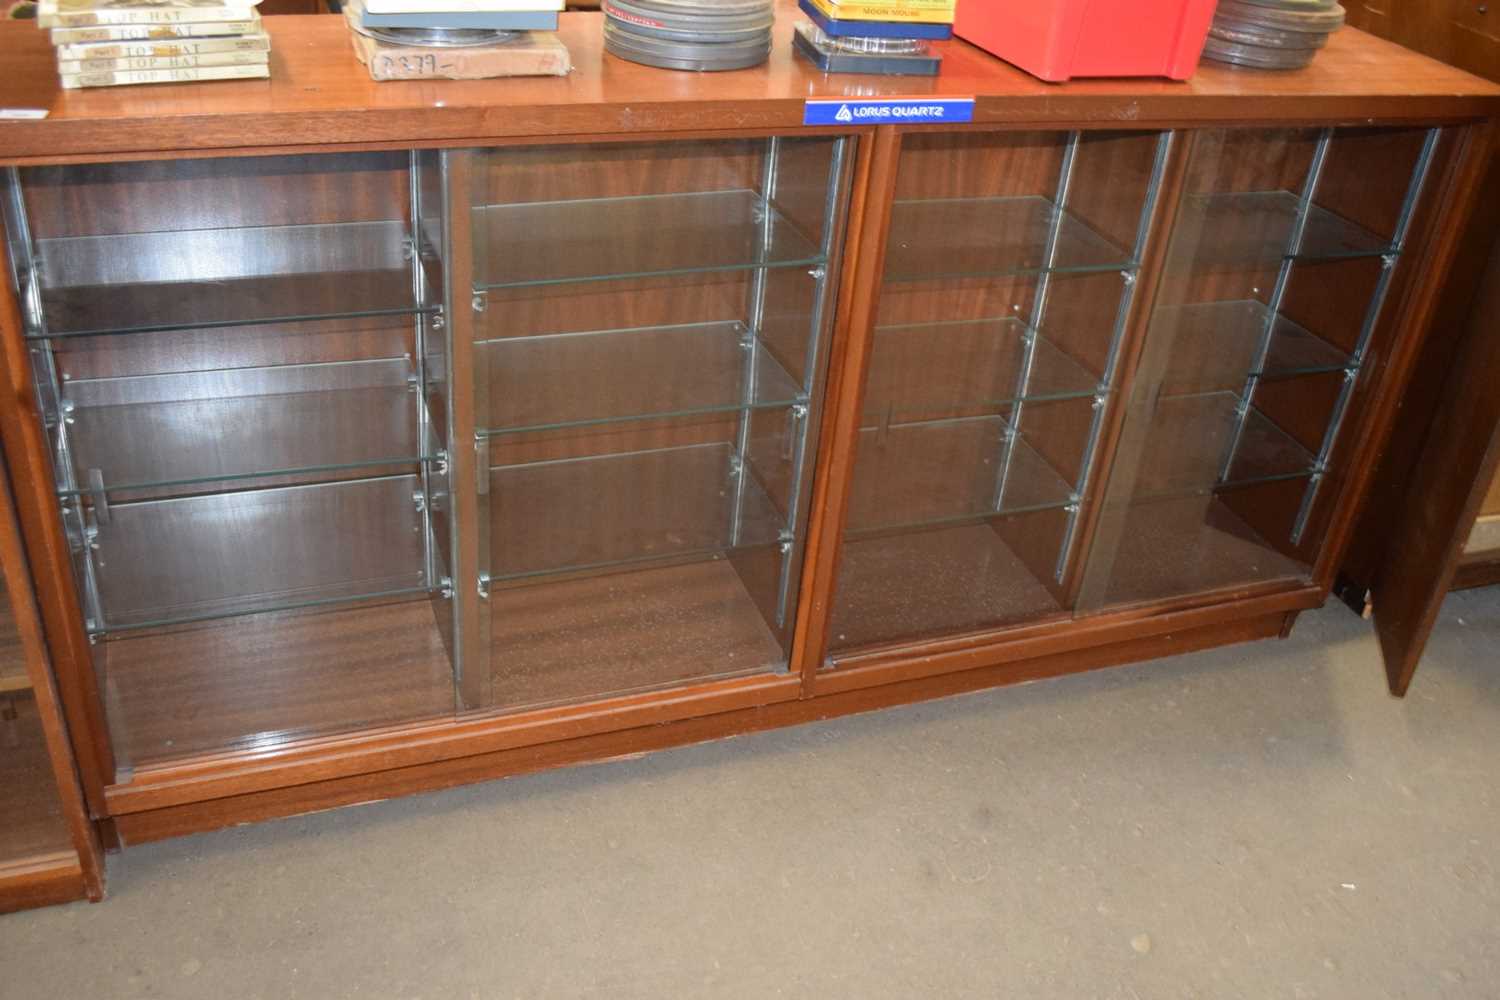 VINTAGE SHOP DISPLAY CABINET WITH FOUR SLIDING GLASS DOORS AND GLASS SHELVED INTERIOR, 180CM WIDE